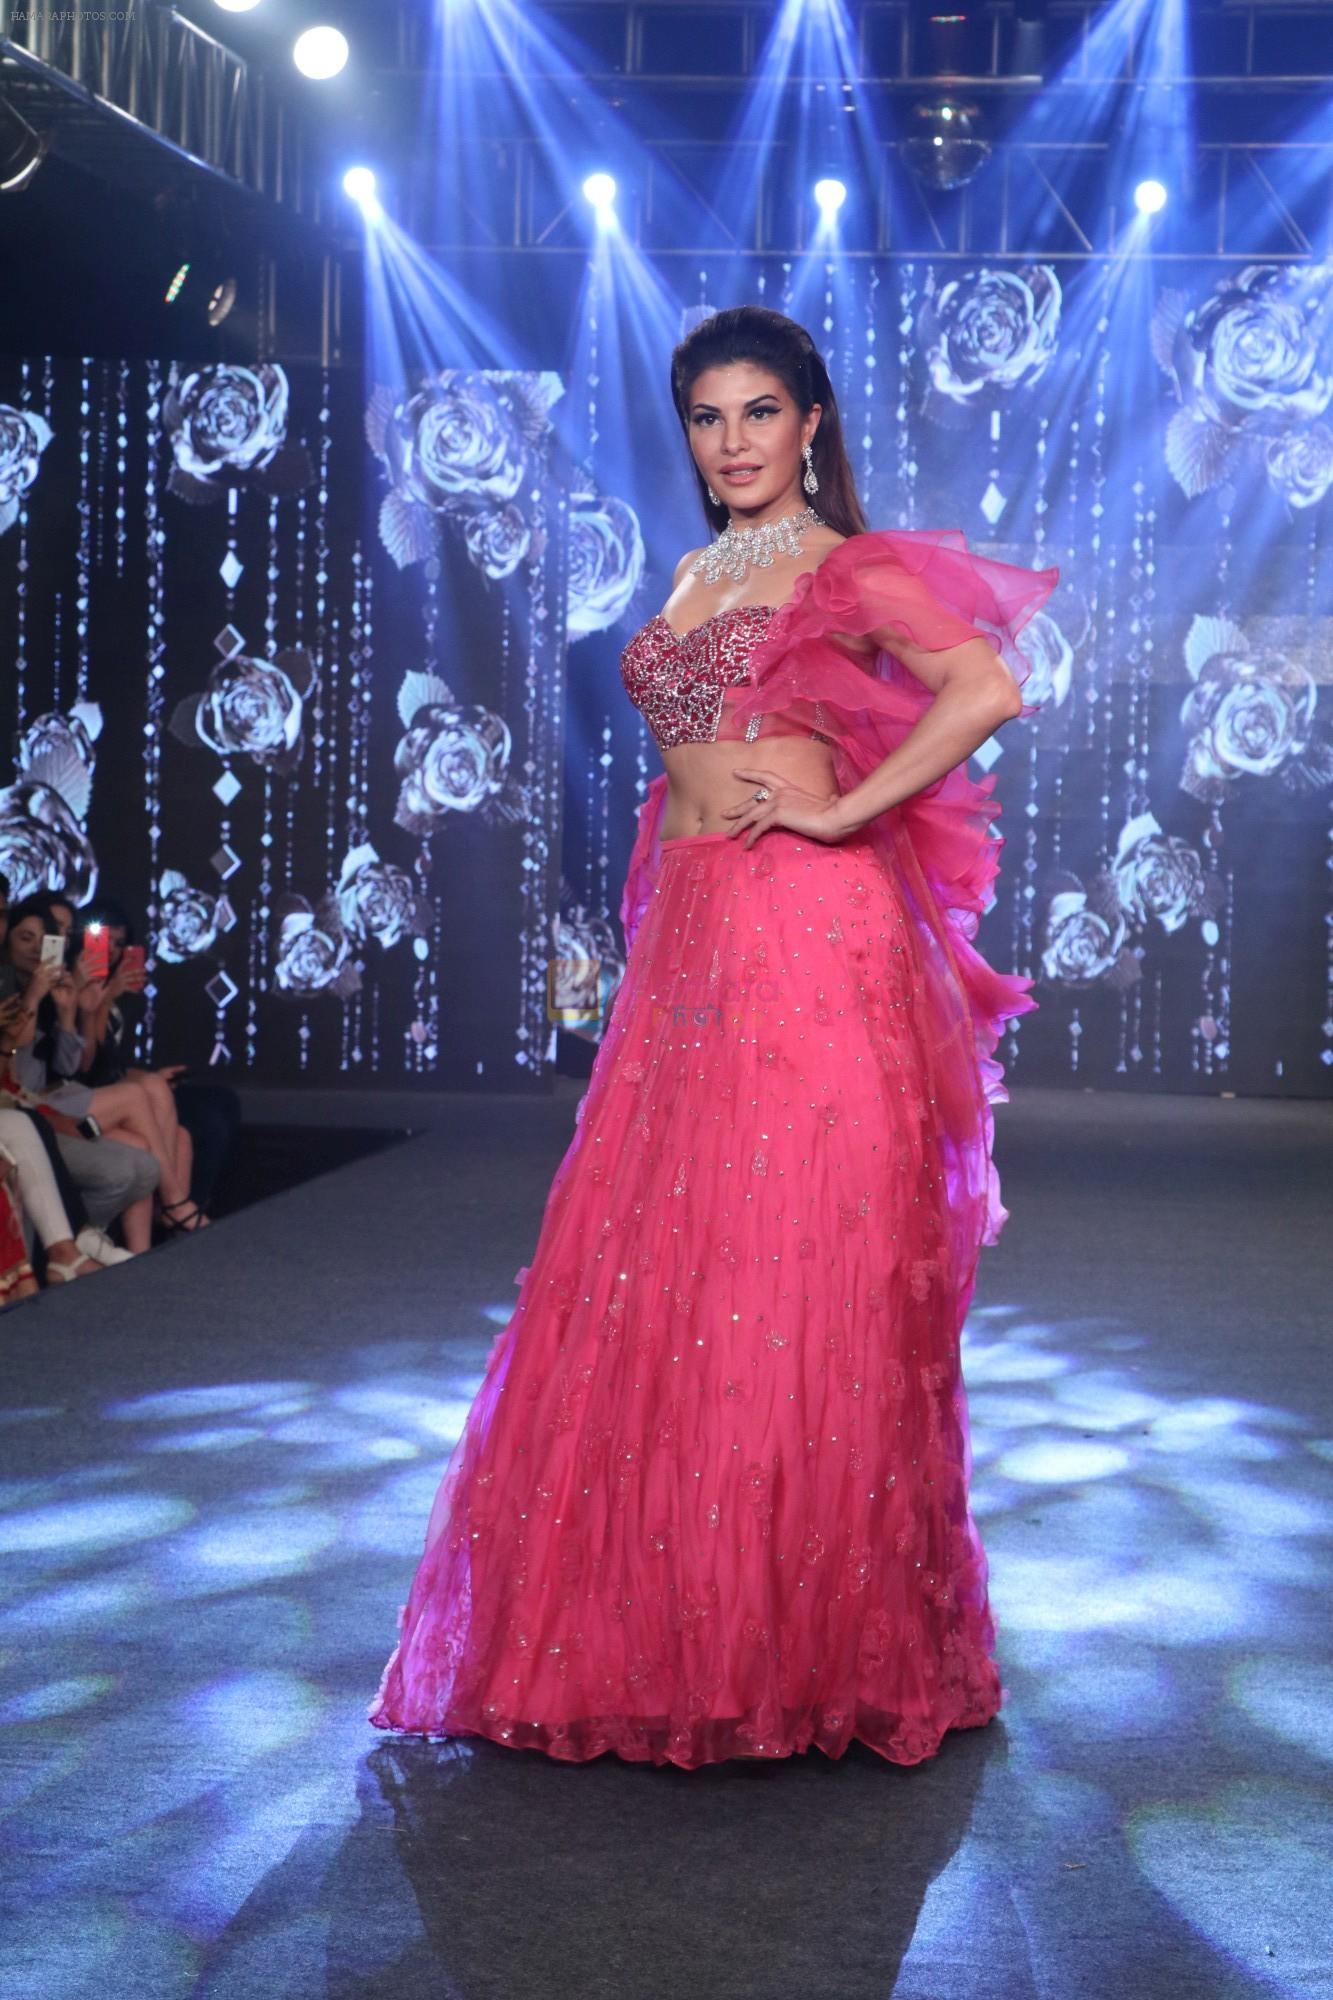 Jacqueline Fernandez The Ramp As ShowStopper For Designer Shehlaa Khan At The Wedding Junction Show on 28th Oct 2018